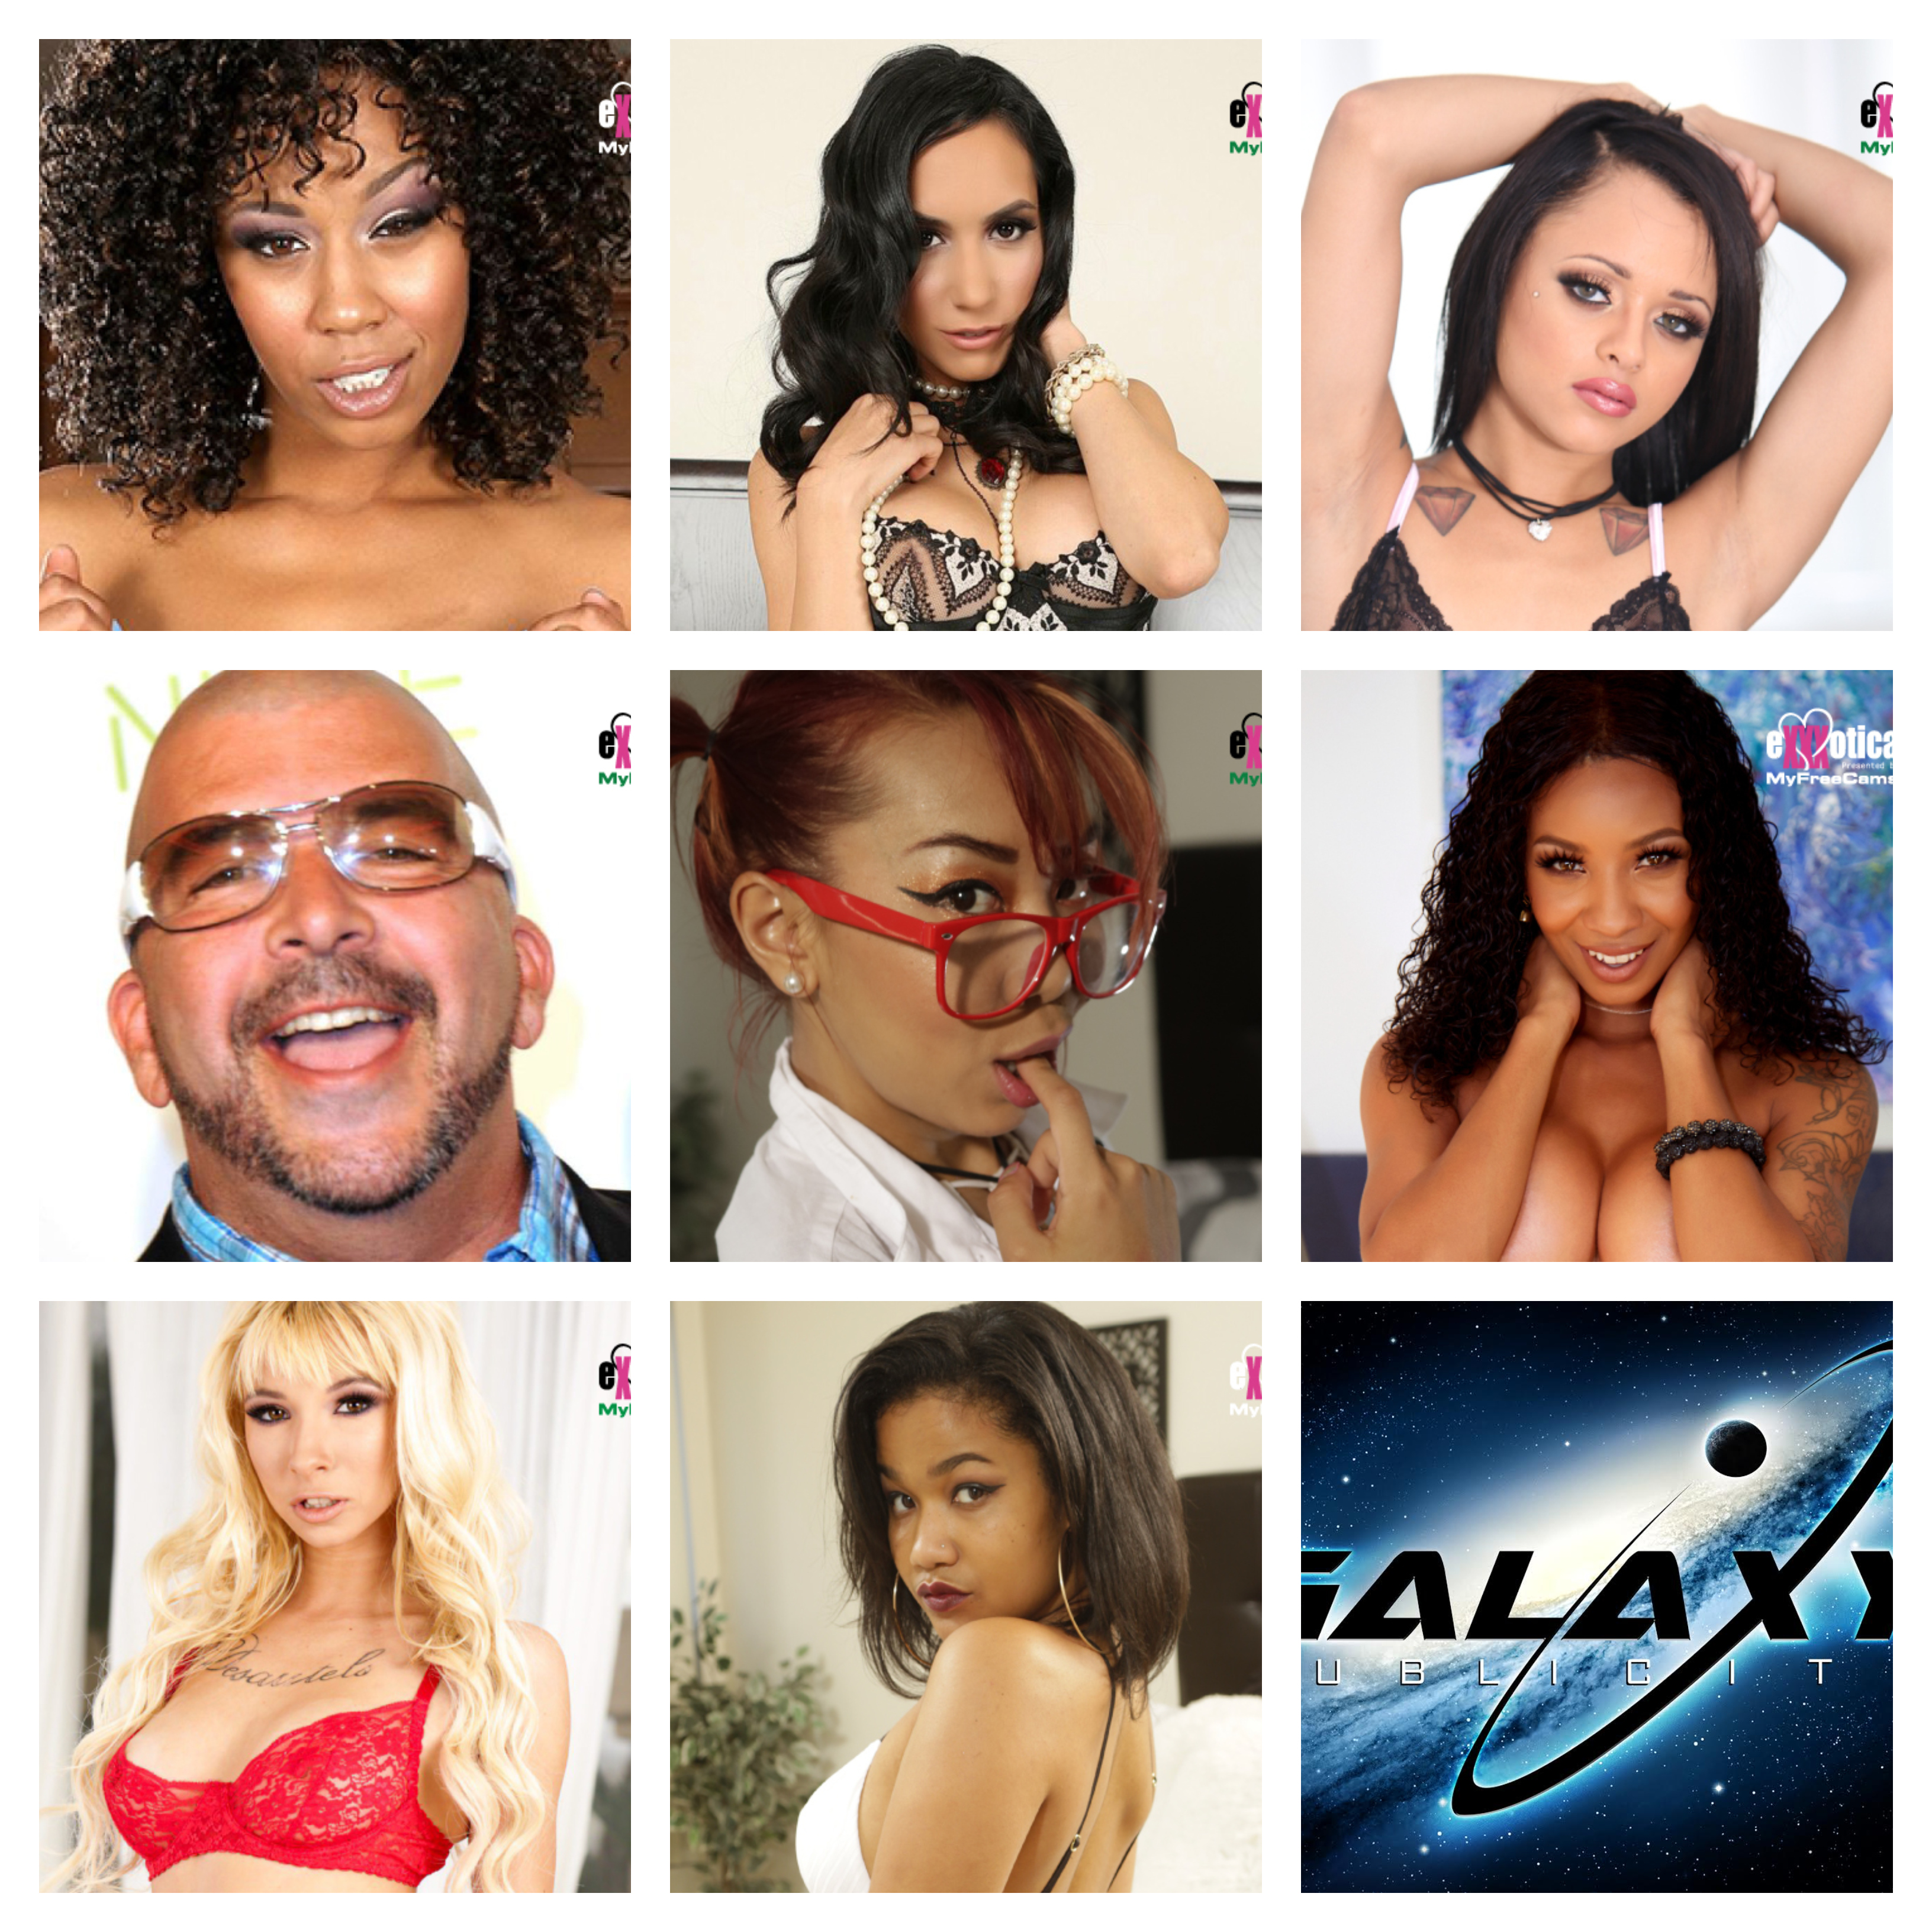 “XXX Stars Attending Exxxotica New Jersey November 2nd, 3rd, and 4th”